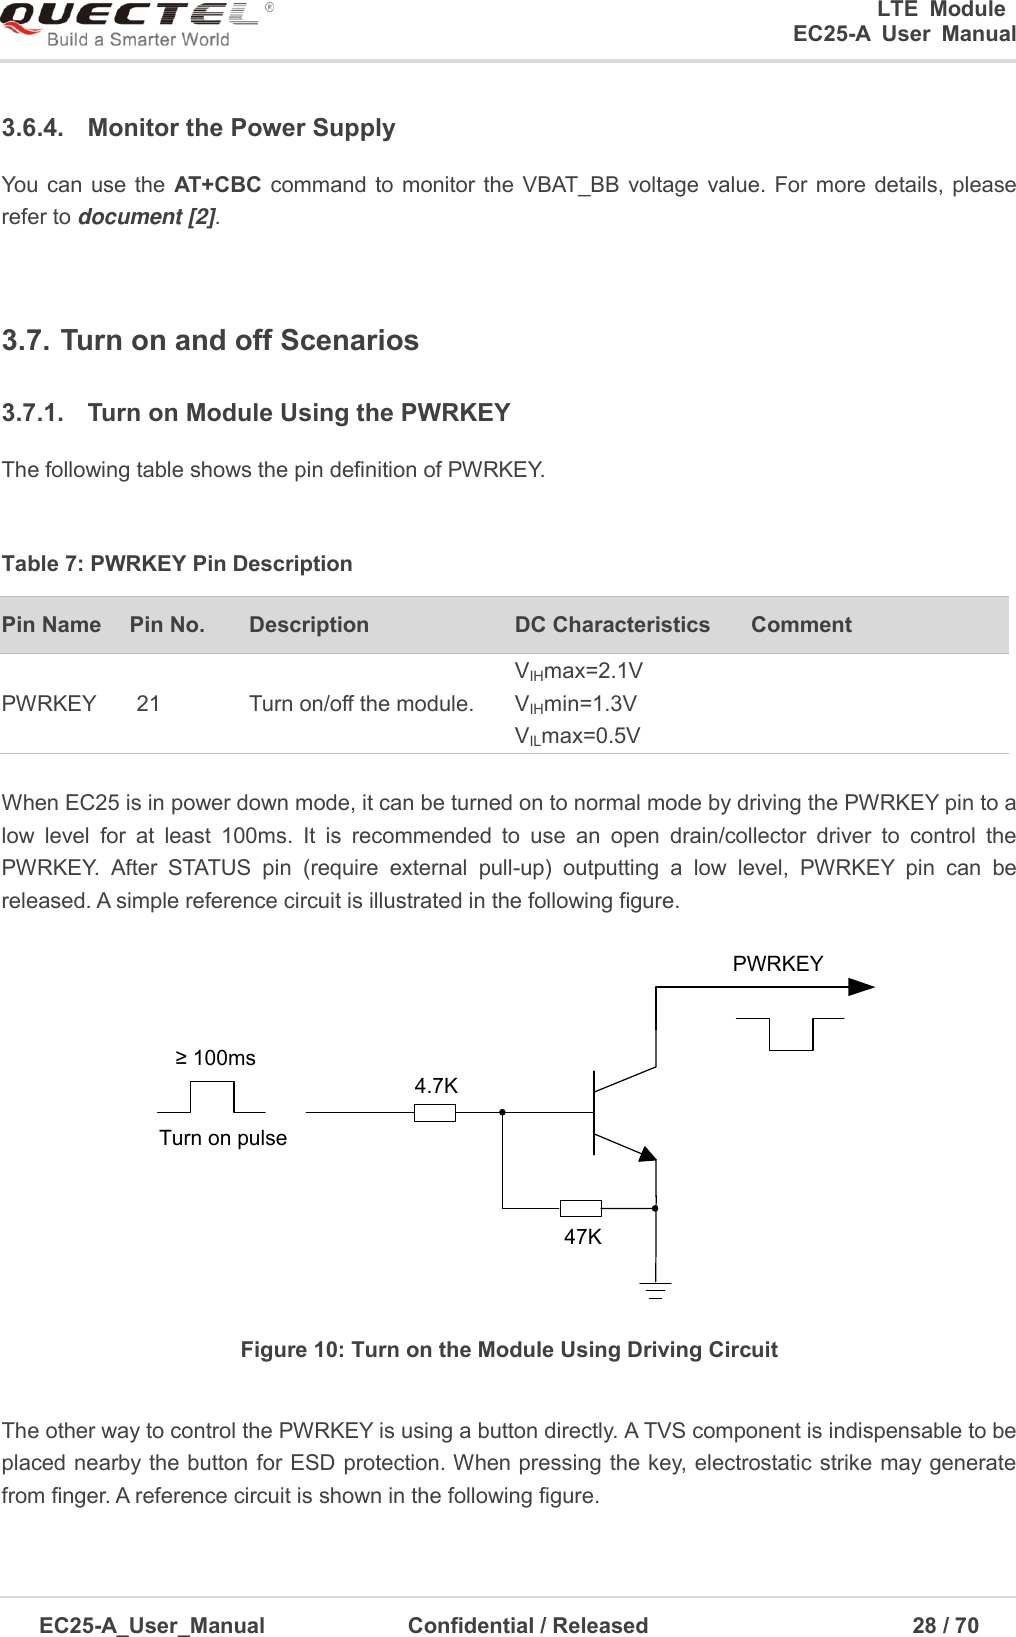 0      LTE  Module      EC25-A  User  Manual EC25-A_User_Manual  Confidential / Released      28 / 7  3.6.4.  Monitor the Power Supply You  can  use the  AT+CBC  command to monitor the VBAT_BB voltage value. For more  details, please refer to document [2].   3.7. Turn on and off Scenarios 3.7.1.  Turn on Module Using the PWRKEY The following table shows the pin definition of PWRKEY. Table 7: PWRKEY Pin Description Pin Name Pin No. Description DC Characteristics Comment PWRKEY 21 Turn on/off the module. VIHmax=2.1V VIHmin=1.3V VILmax=0.5V When EC25 is in power down mode, it can be turned on to normal mode by driving the PWRKEY pin to a low  level  for  at  least  100ms.  It  is  recommended  to  use  an  open  drain/collector  driver  to  control  the PWRKEY.  After  STATUS  pin  (require  external  pull-up)  outputting  a  low  level,  PWRKEY  pin  can  be released. A simple reference circuit is illustrated in the following figure.   Turn on pulsePWRKEY4.7K47K≥ 100msFigure 10: Turn on the Module Using Driving Circuit The other way to control the PWRKEY is using a button directly. A TVS component is indispensable to be placed nearby the button for ESD protection. When pressing the key, electrostatic strike may generate from finger. A reference circuit is shown in the following figure.   